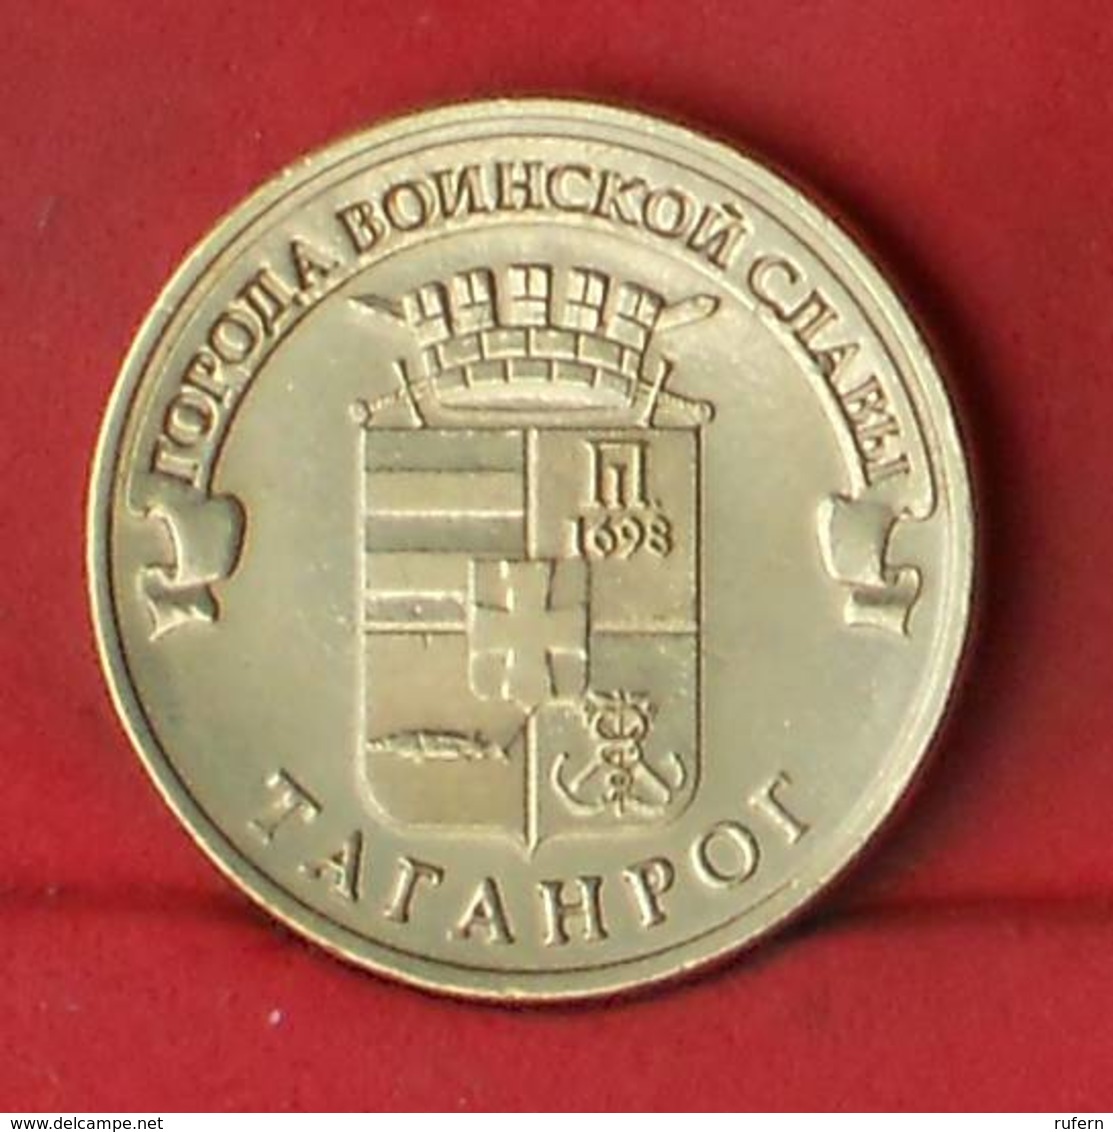 RUSSIA 10 ROUBLES 2015 -     (Nº27819) - Russie